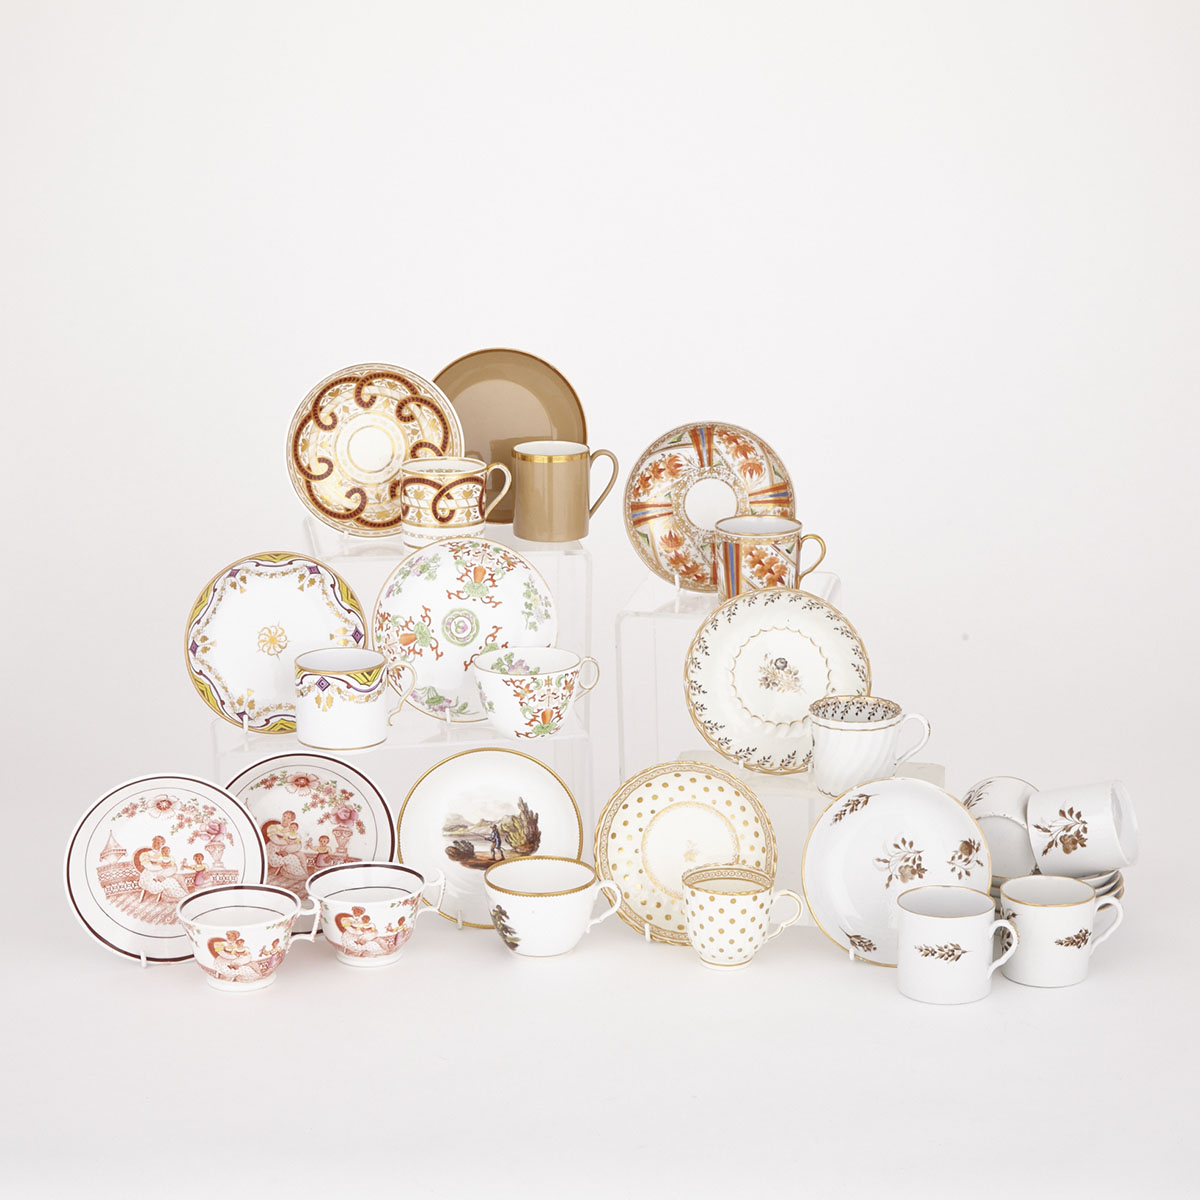 Fourteen Various English Porcelain Cups and Saucers, 19th century